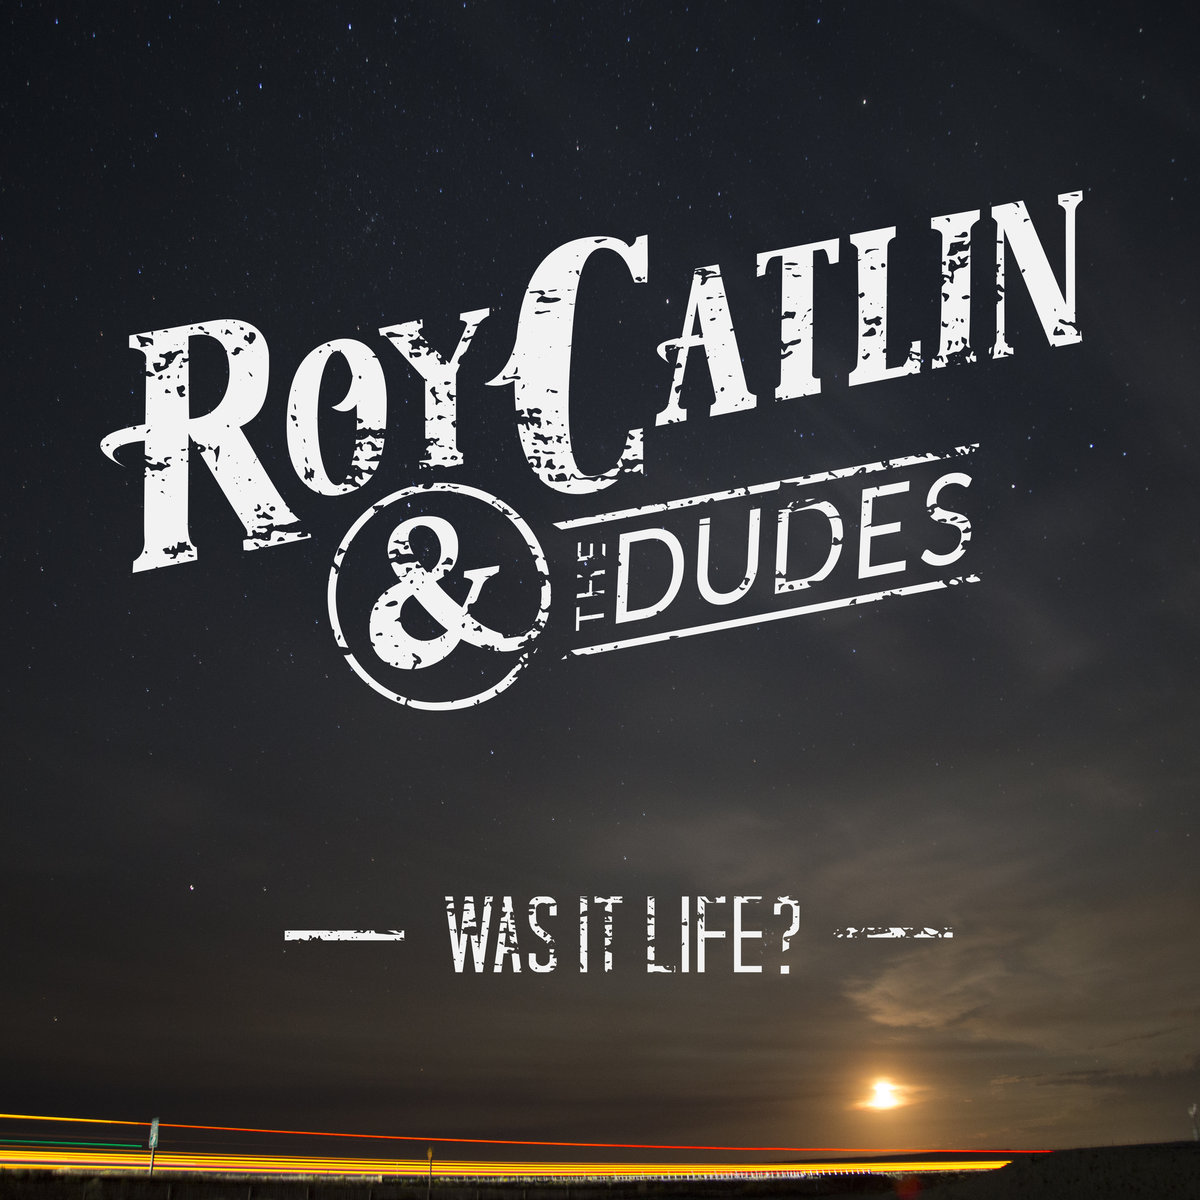  Roy Catlin & The Dudes – Was It Life?